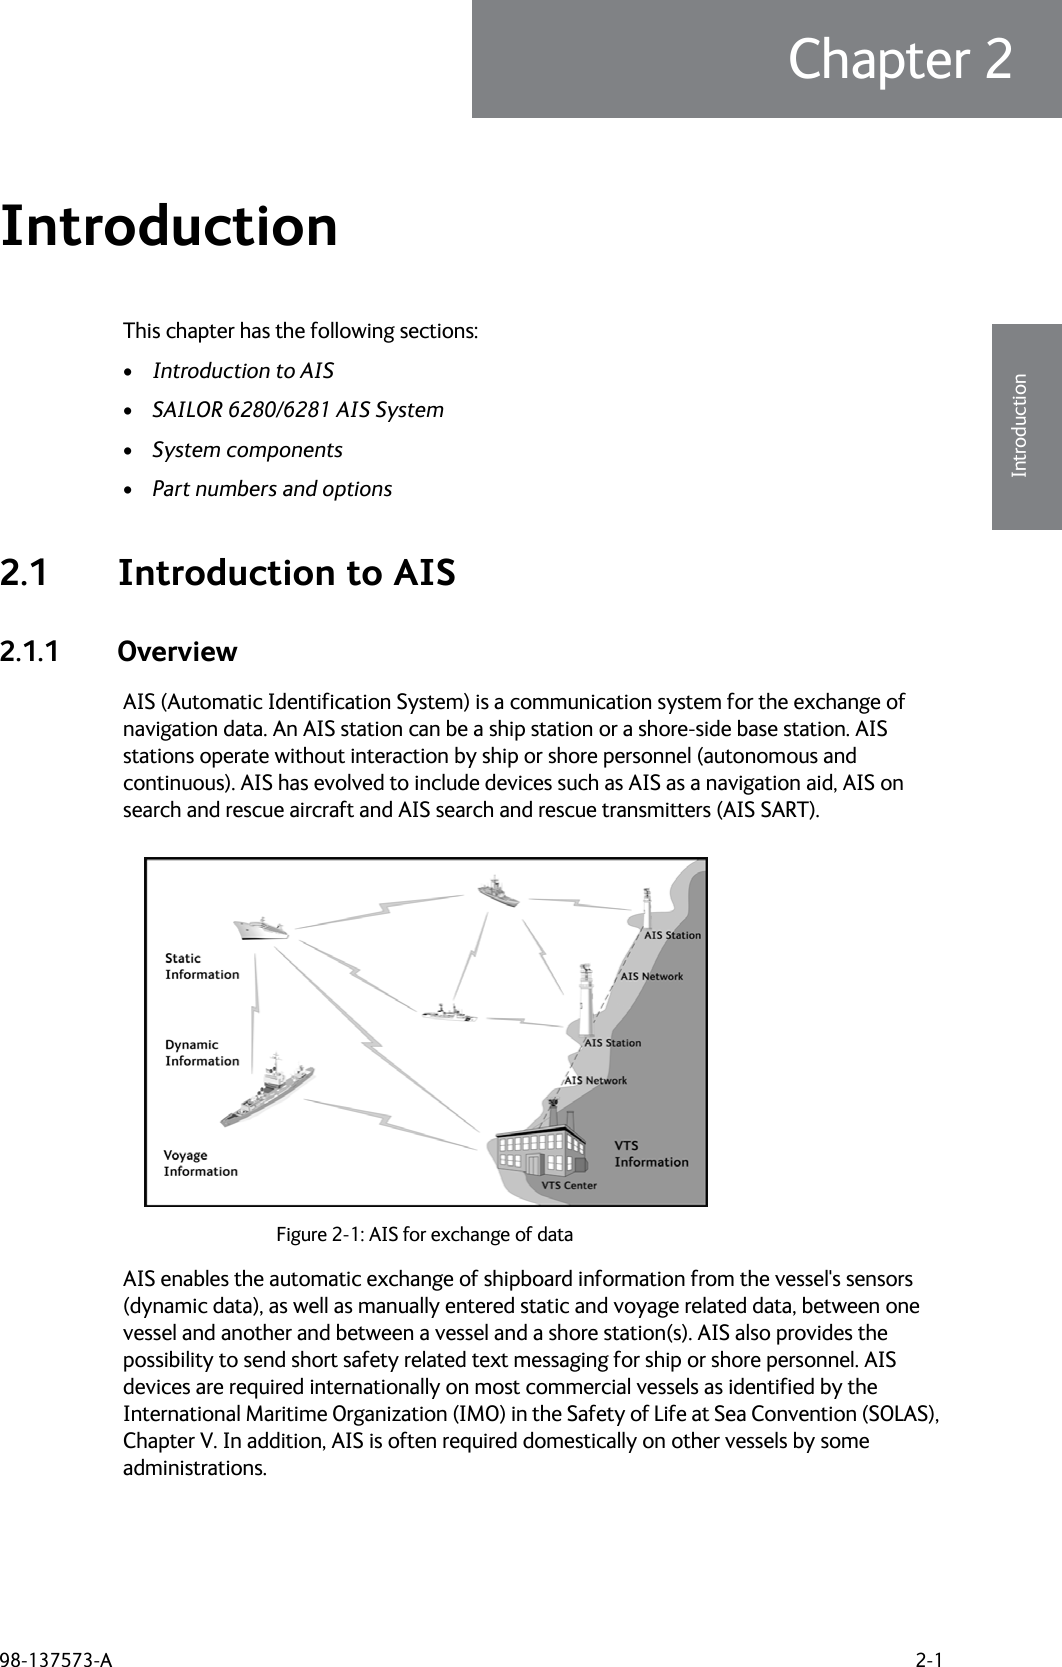 98-137573-A 2-1Chapter 22222IntroductionIntroduction 2This chapter has the following sections:•Introduction to AIS•SAILOR 6280/6281 AIS System•System components•Part numbers and options2.1 Introduction to AIS2.1.1 OverviewAIS (Automatic Identification System) is a communication system for the exchange of navigation data. An AIS station can be a ship station or a shore-side base station. AIS stations operate without interaction by ship or shore personnel (autonomous and continuous). AIS has evolved to include devices such as AIS as a navigation aid, AIS on search and rescue aircraft and AIS search and rescue transmitters (AIS SART).AIS enables the automatic exchange of shipboard information from the vessel&apos;s sensors (dynamic data), as well as manually entered static and voyage related data, between one vessel and another and between a vessel and a shore station(s). AIS also provides the possibility to send short safety related text messaging for ship or shore personnel. AIS devices are required internationally on most commercial vessels as identified by the International Maritime Organization (IMO) in the Safety of Life at Sea Convention (SOLAS), Chapter V. In addition, AIS is often required domestically on other vessels by some administrations.Figure 2-1: AIS for exchange of data